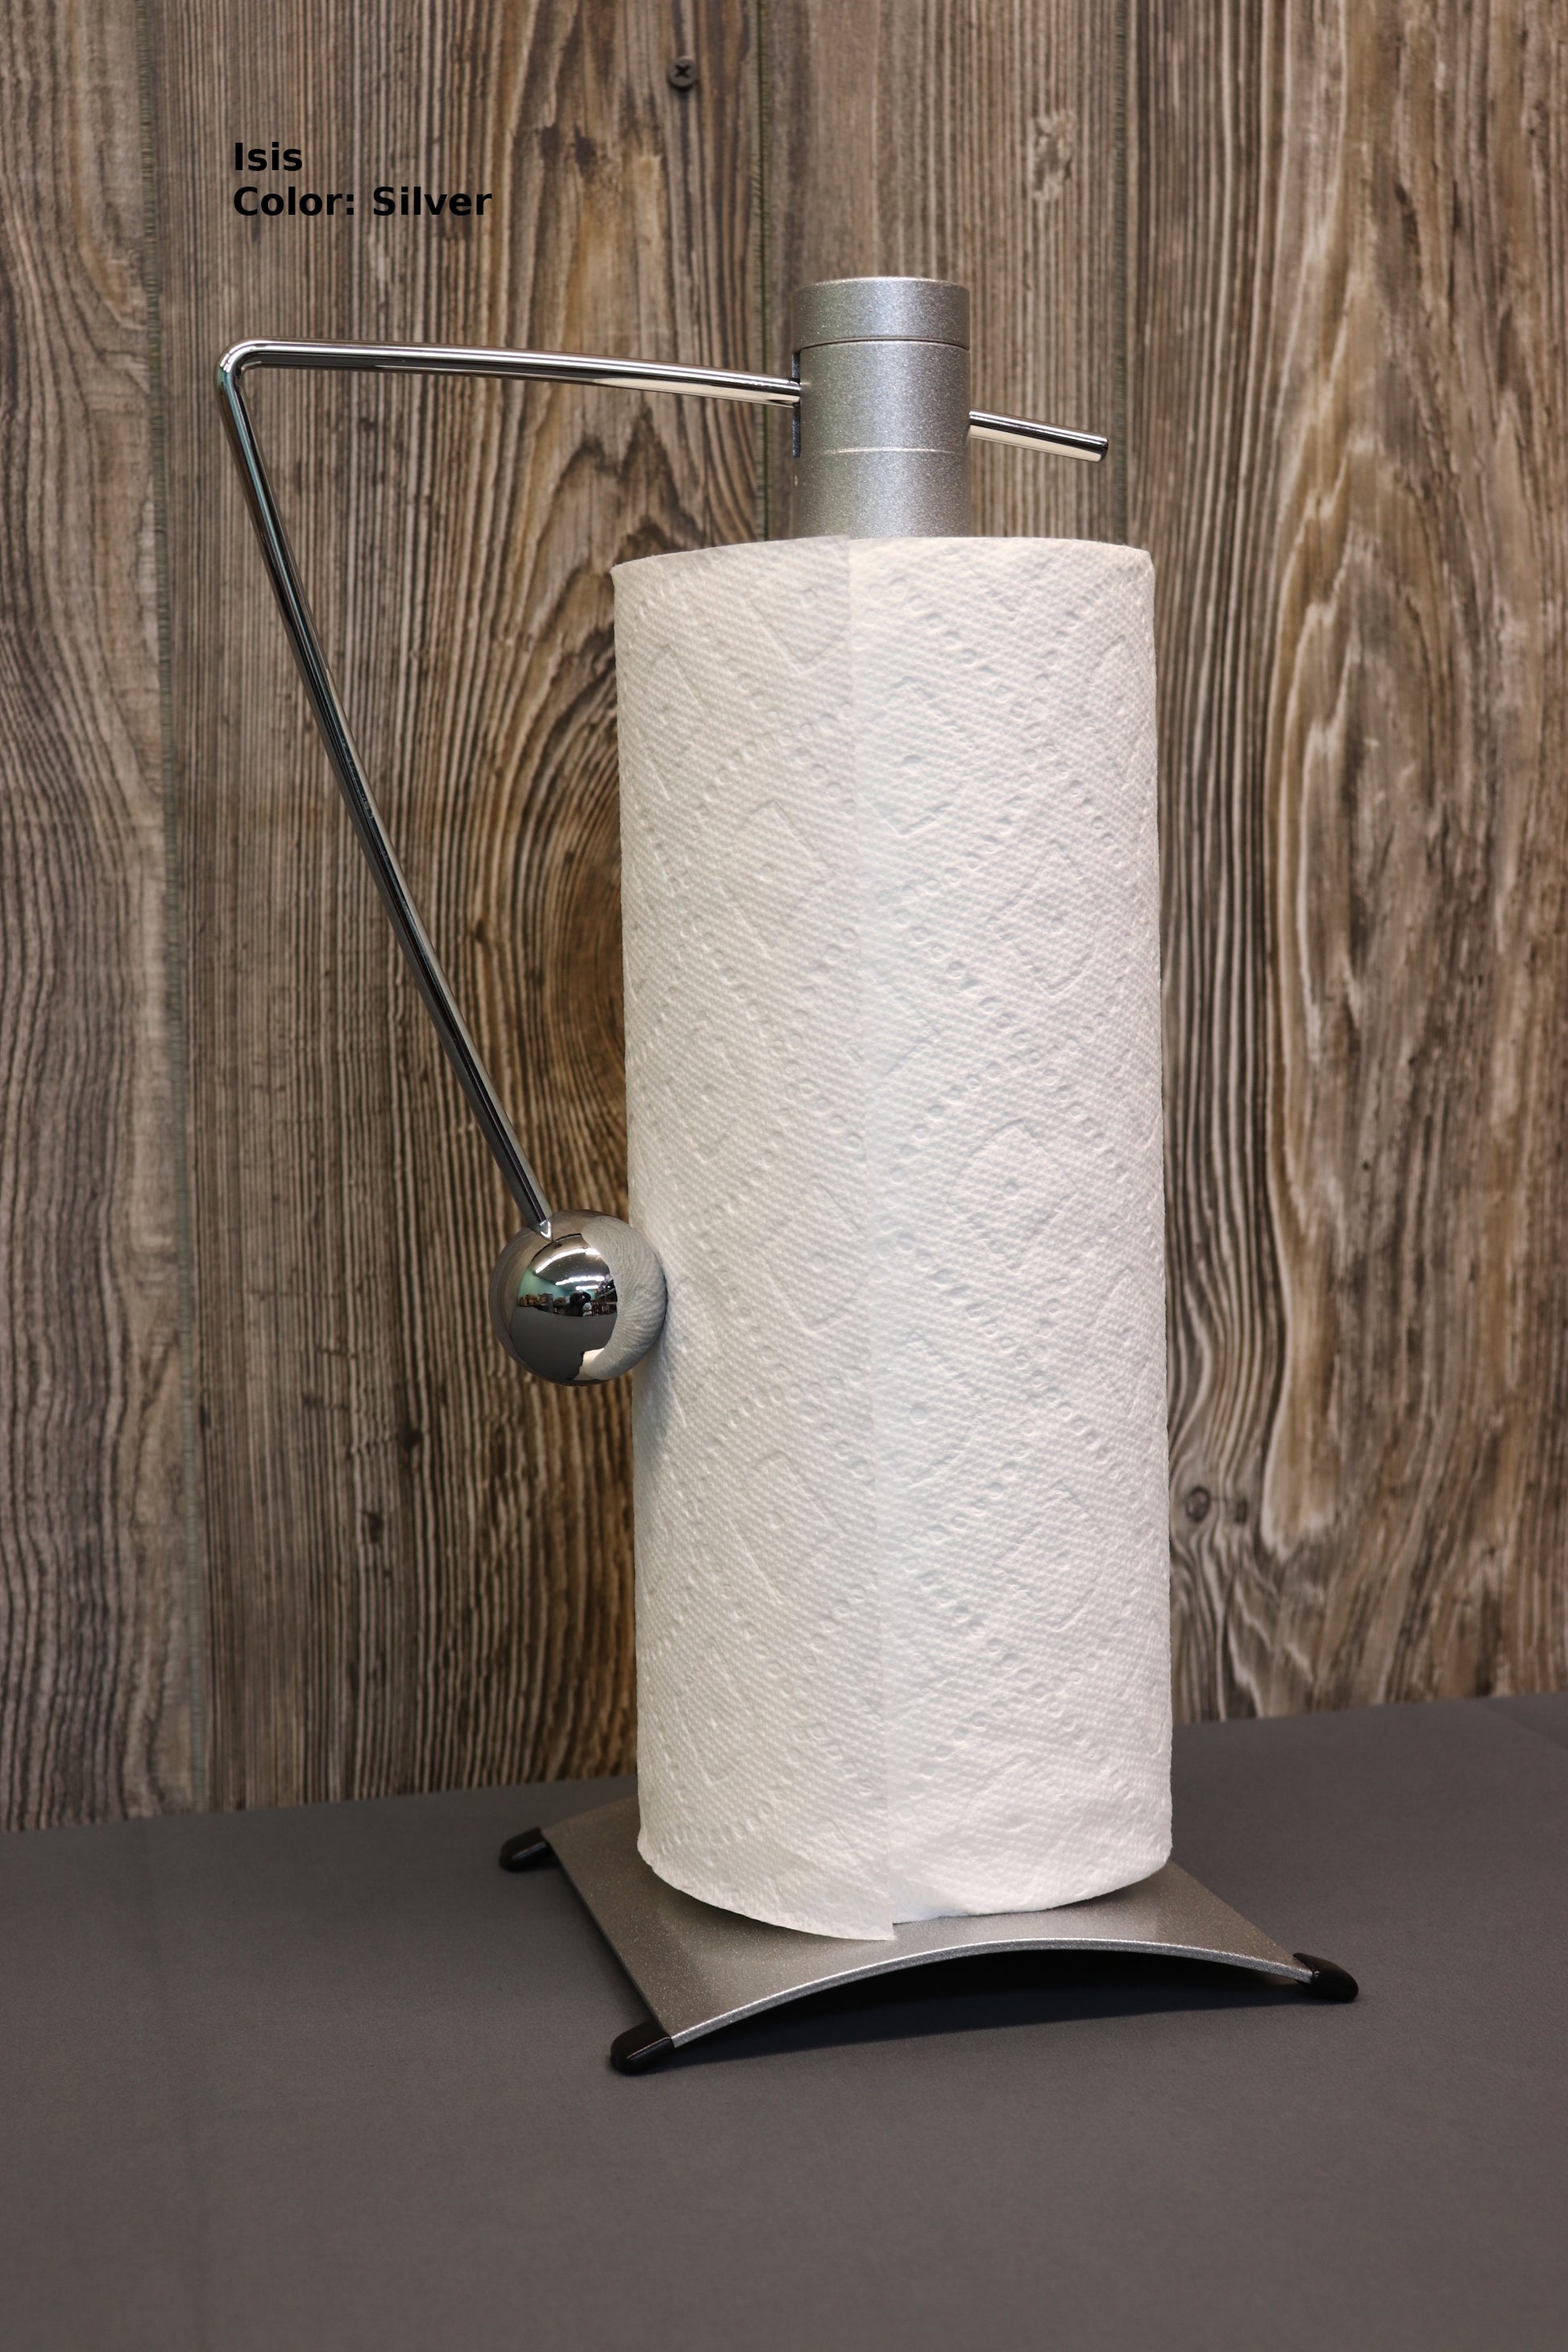 Wall or Cabinet Mounted Paper Towel Holder - Whisk